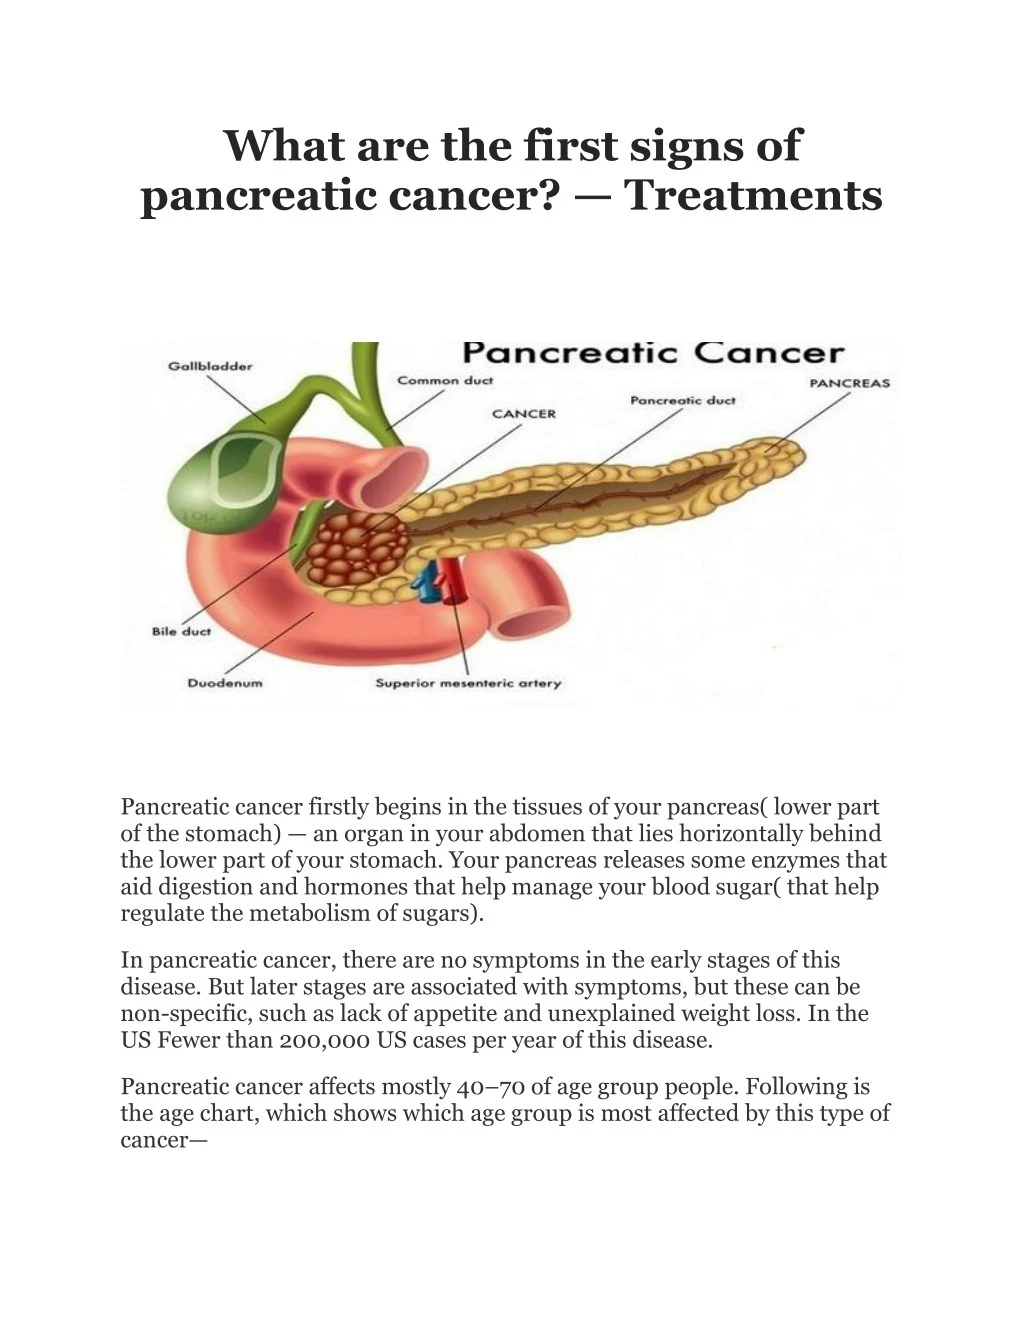 what are the first signs of pancreatic cancer